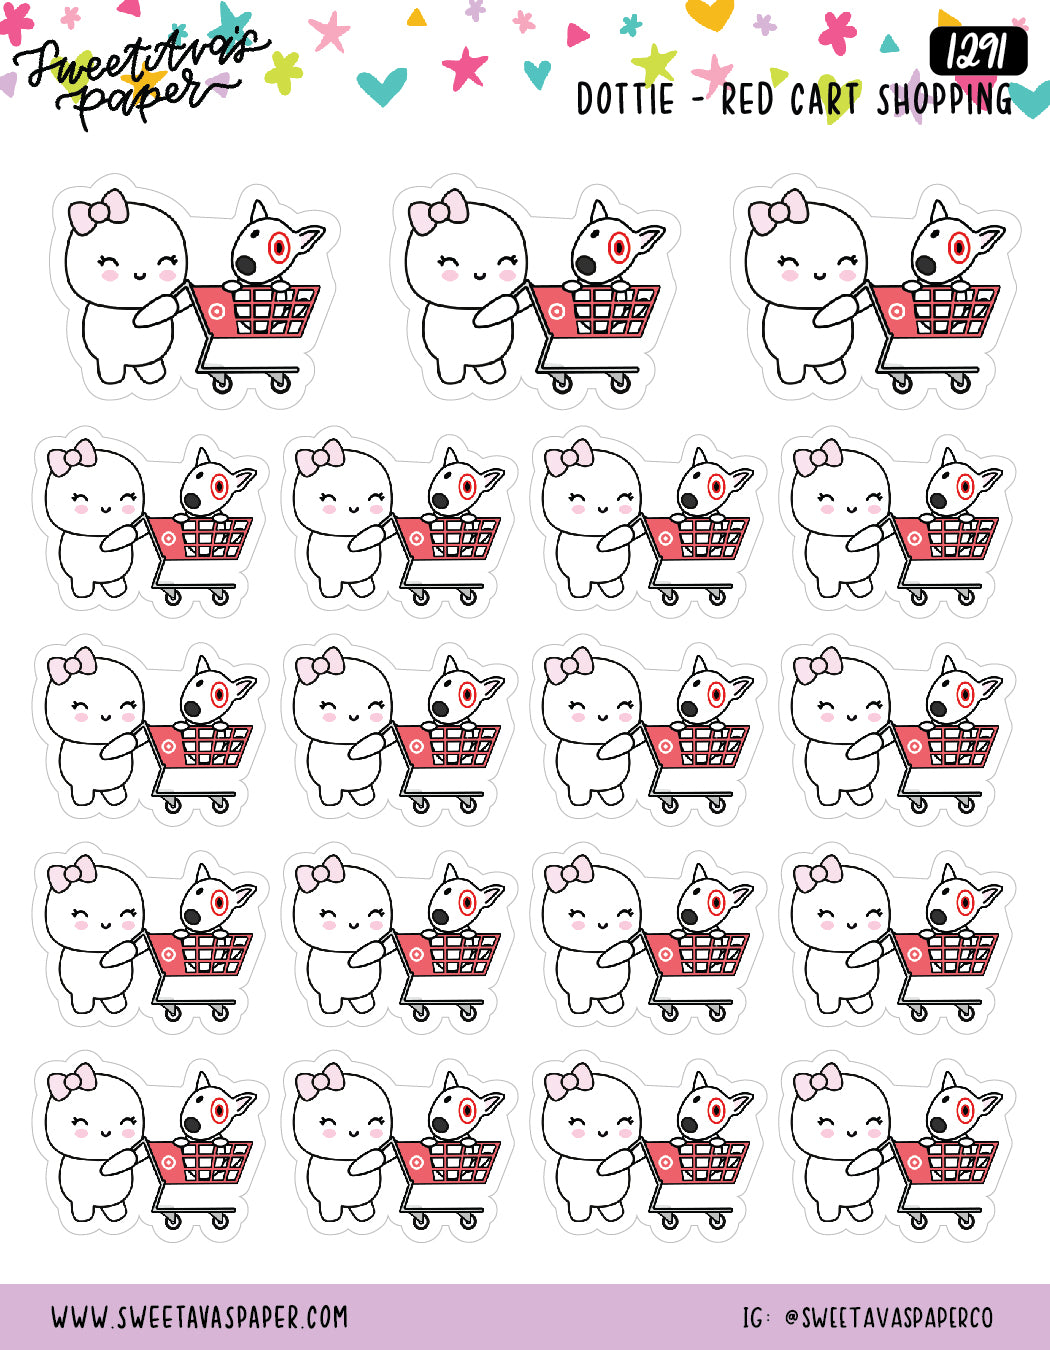 Red Cart Shopping Planner Stickers - Dottie [1291]